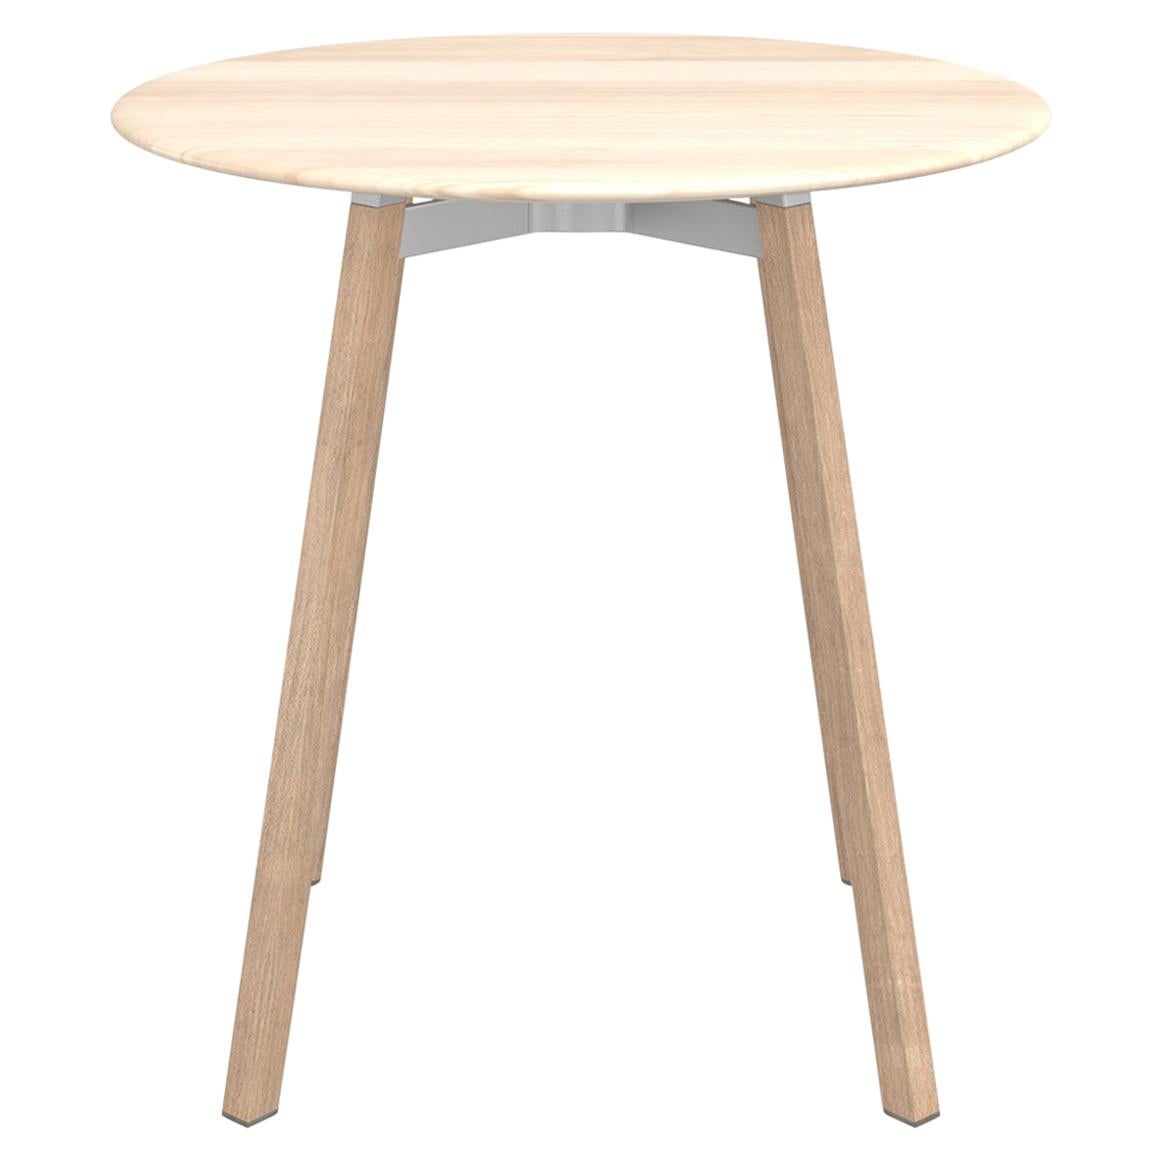 Emeco Su Medium Round Cafe Table with Oak Frame & Accoya Wood Top by Nendo For Sale